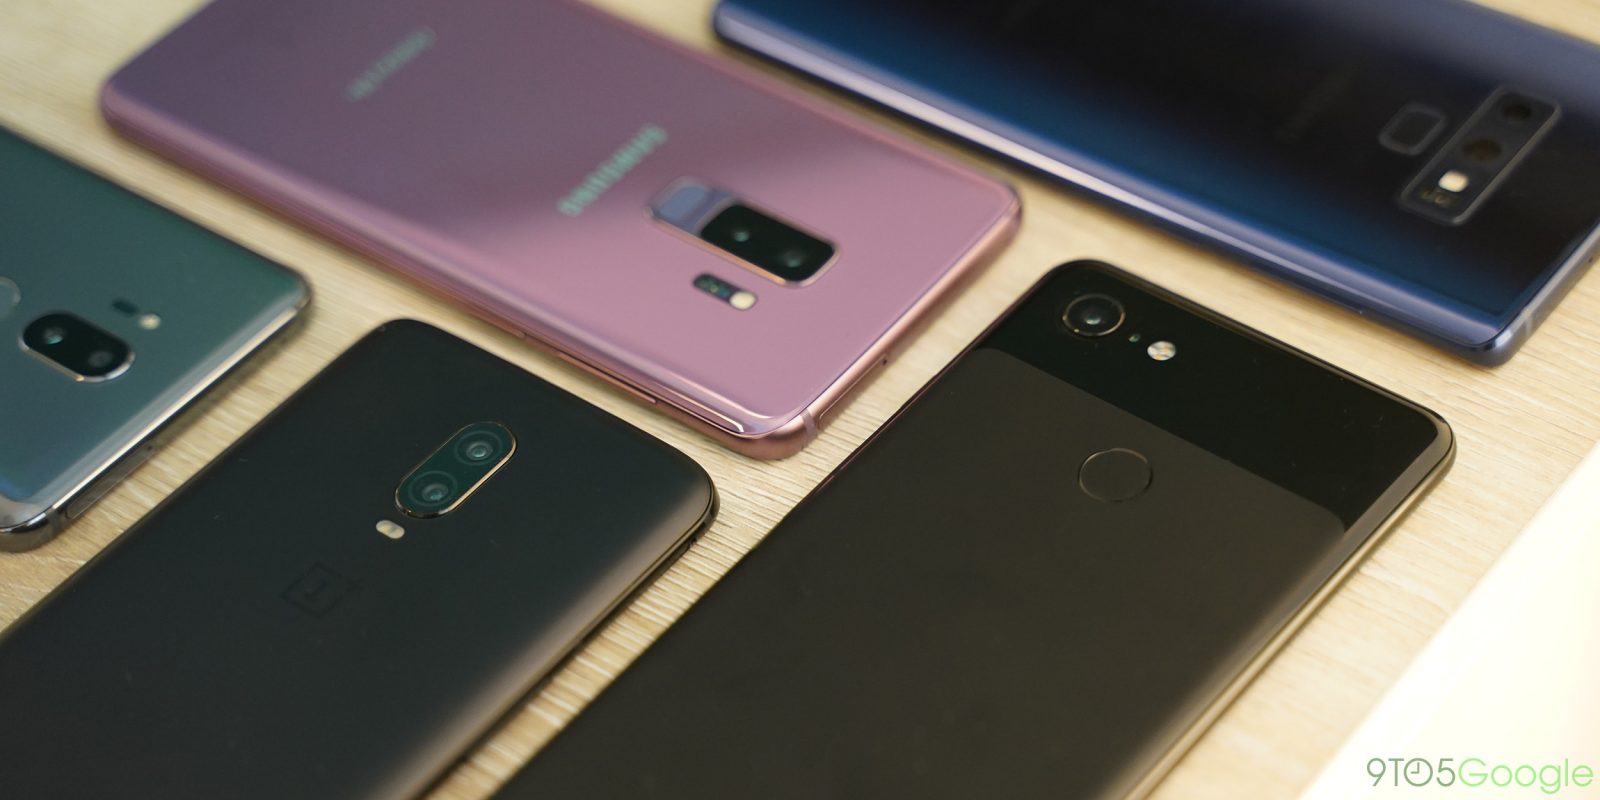 Best Android smartphone of 2018: What would you pick? [Poll]